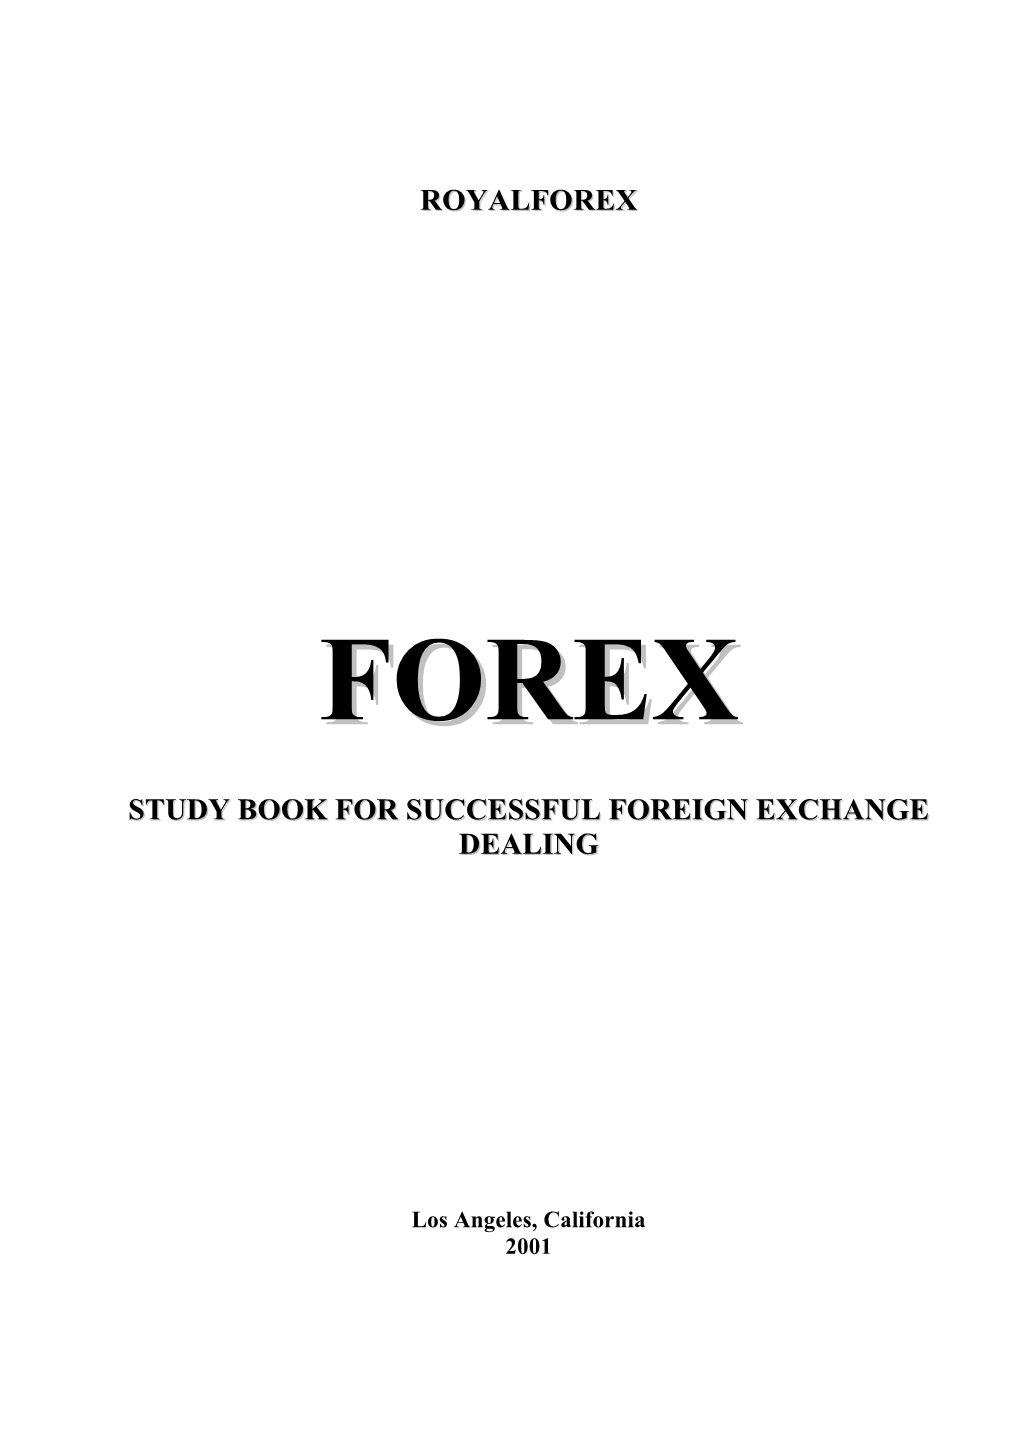 Study Book for Successful Foreign Exchange Dealing